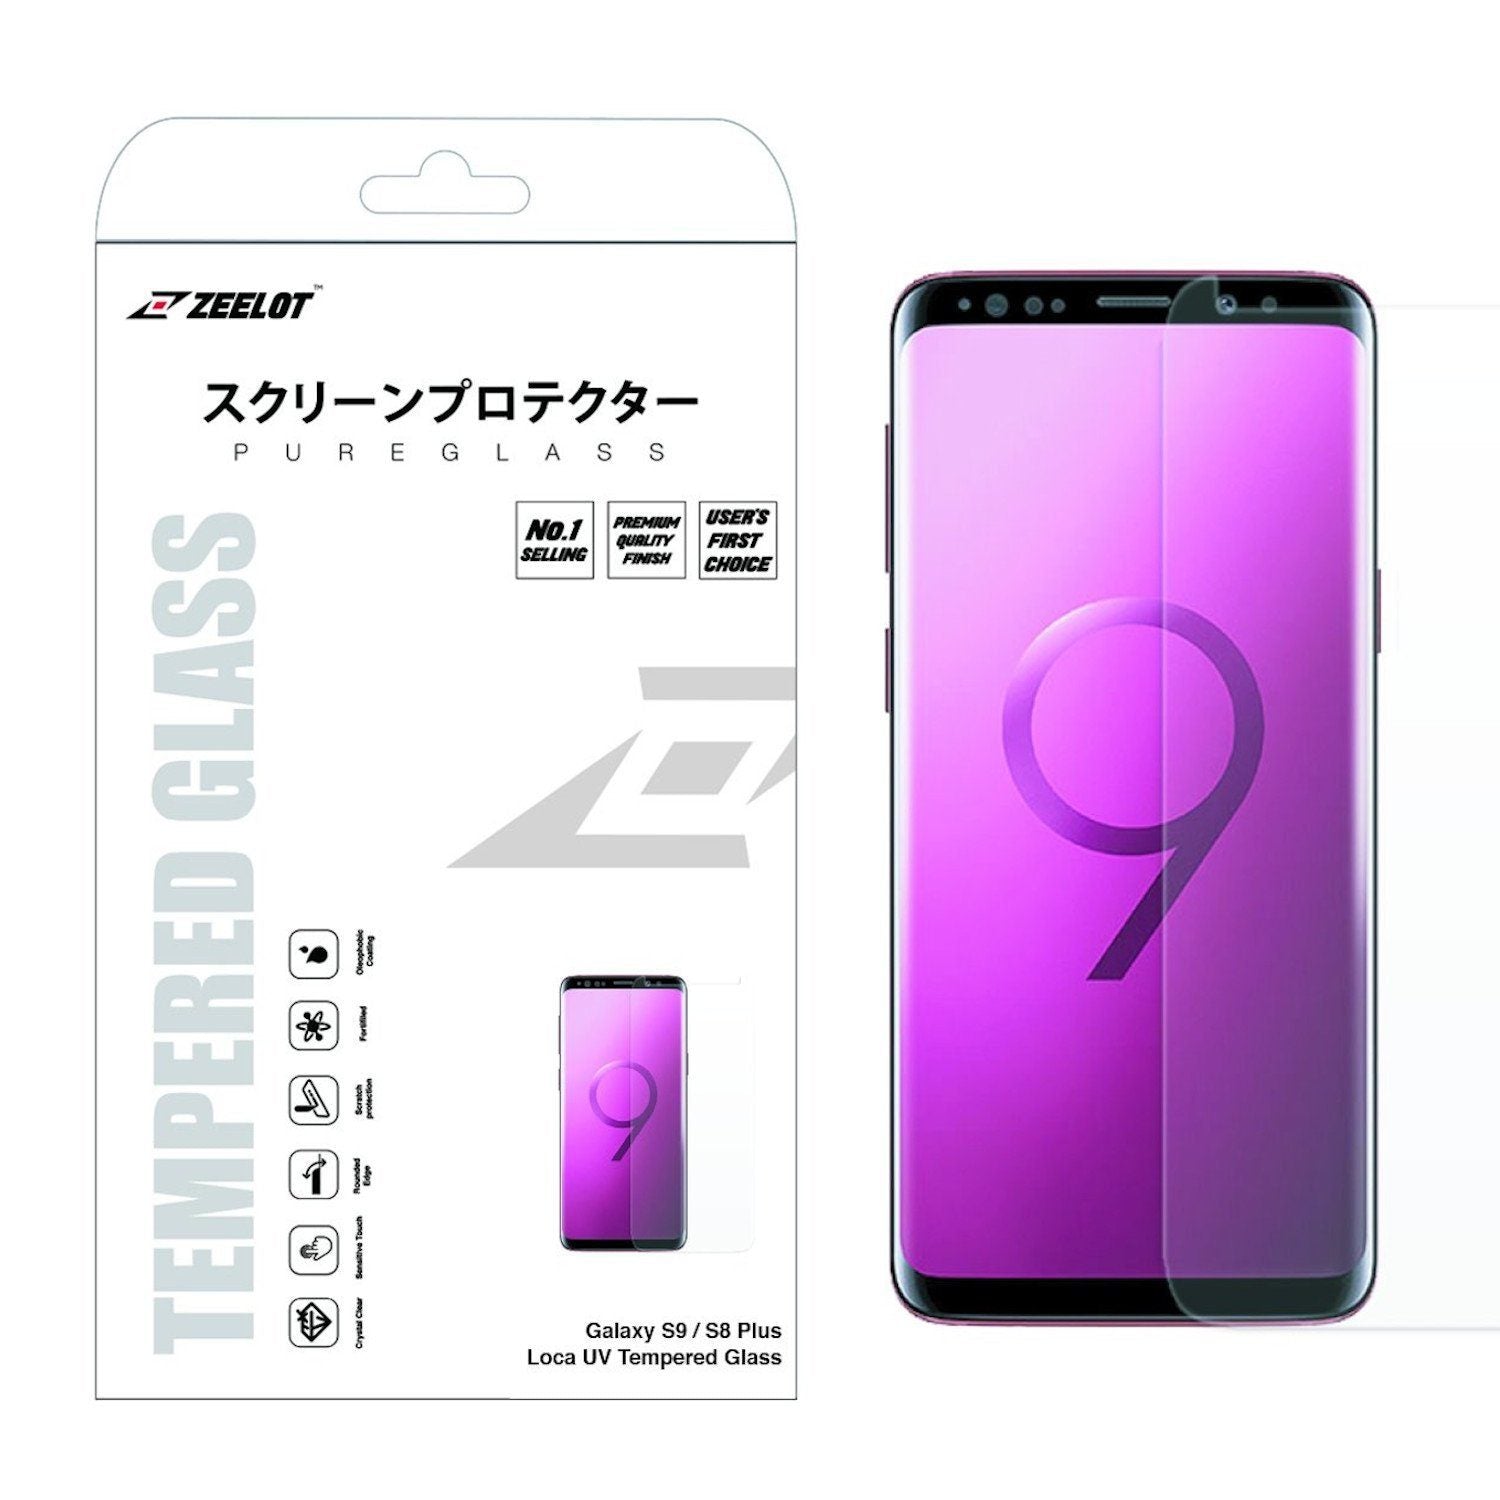 ZEELOT PureGlass 3D Clear LOCA Tempered Glass Screen Protector for Samsung Galaxy S9 Plus/S8 Plus LOCA Tempered Glass Zeelot 